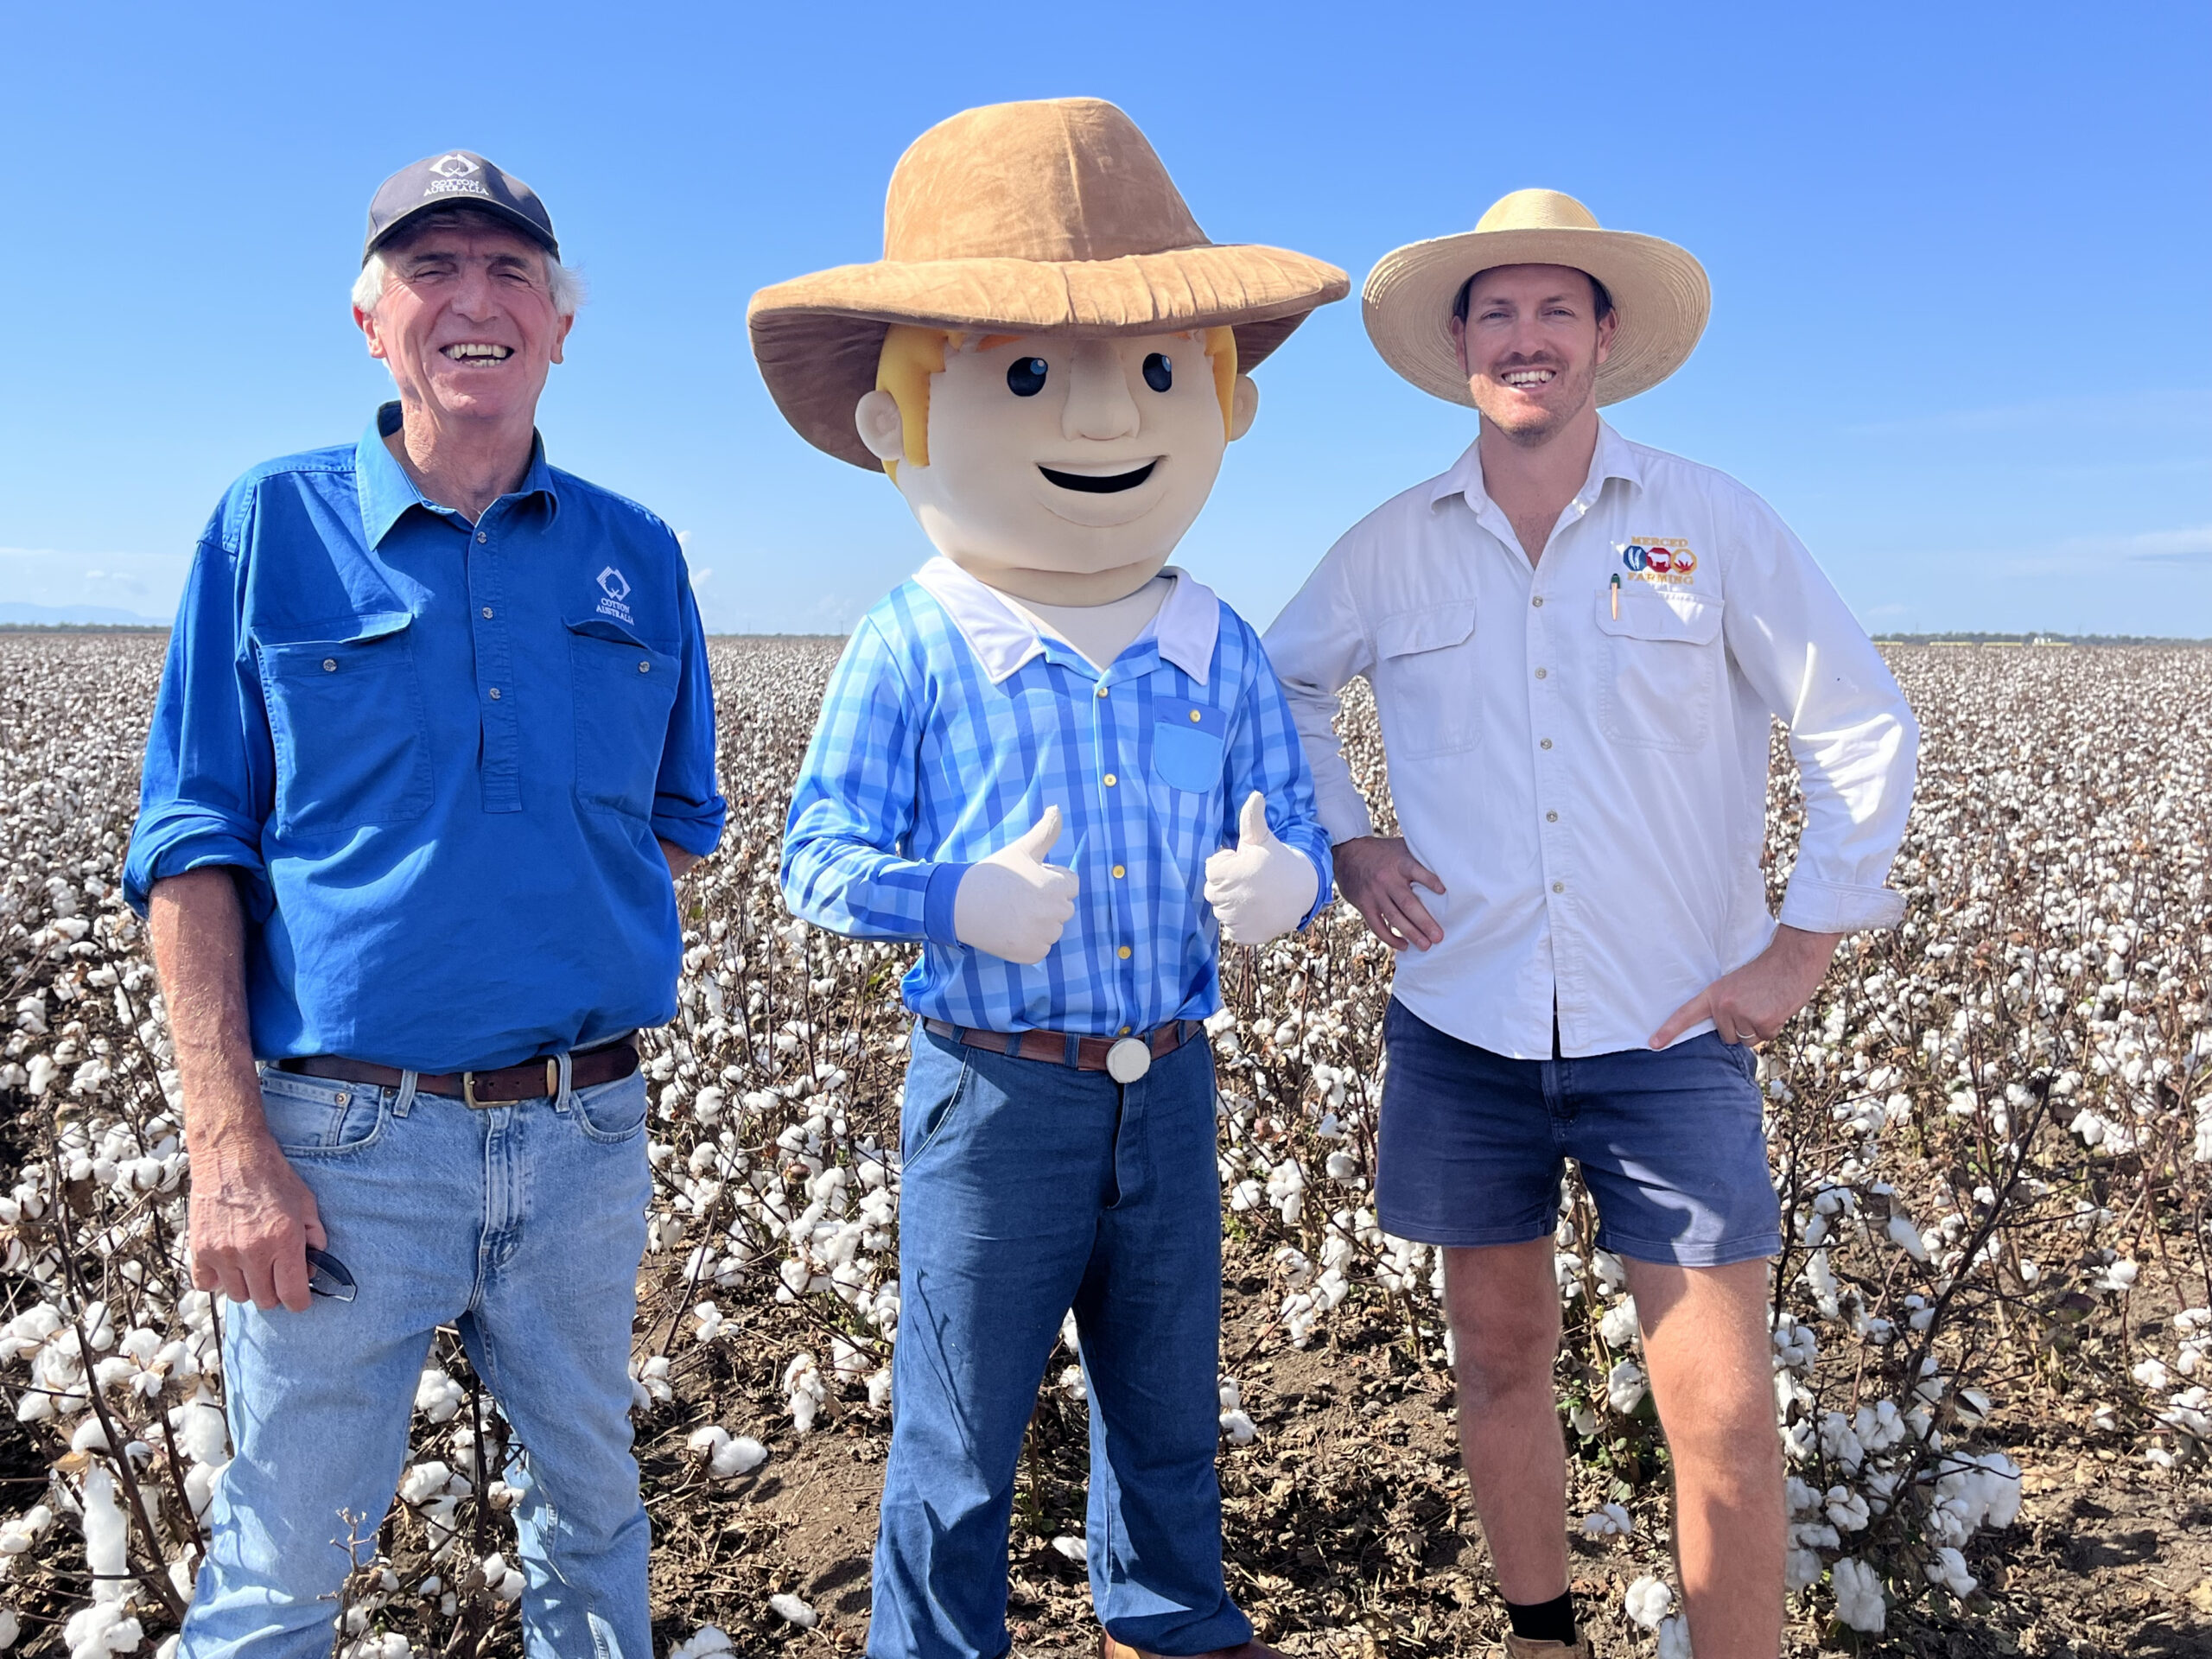 George the Farmer gives the Cotton Capital a big thumbs up - The Courier